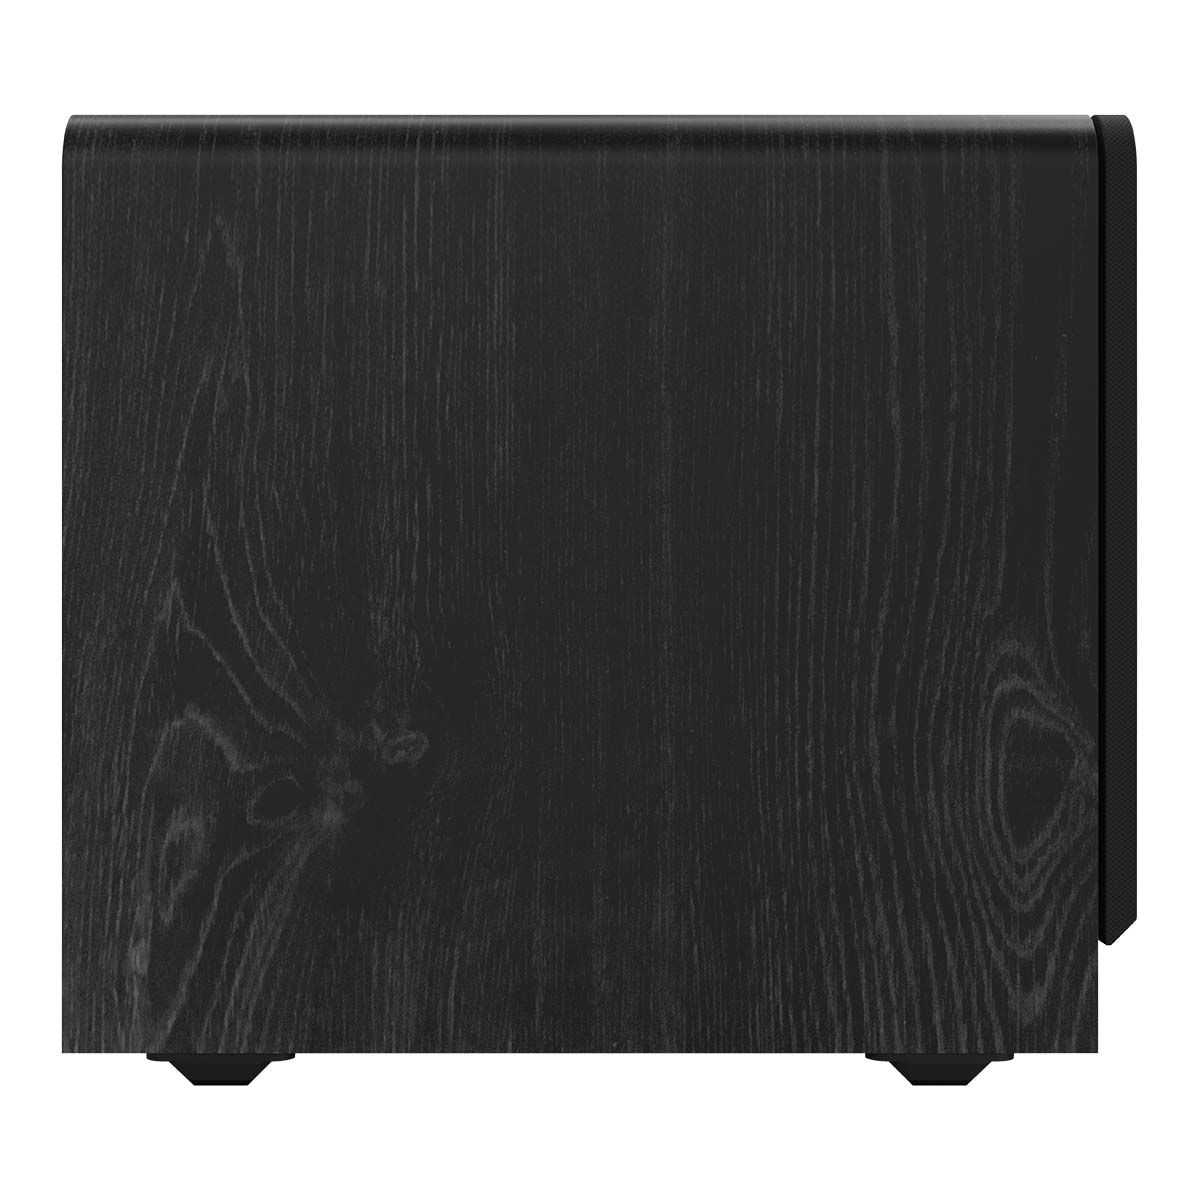 Klipsch RP-1600SW 16" Powered Subwoofer - Ebony - side view with grille